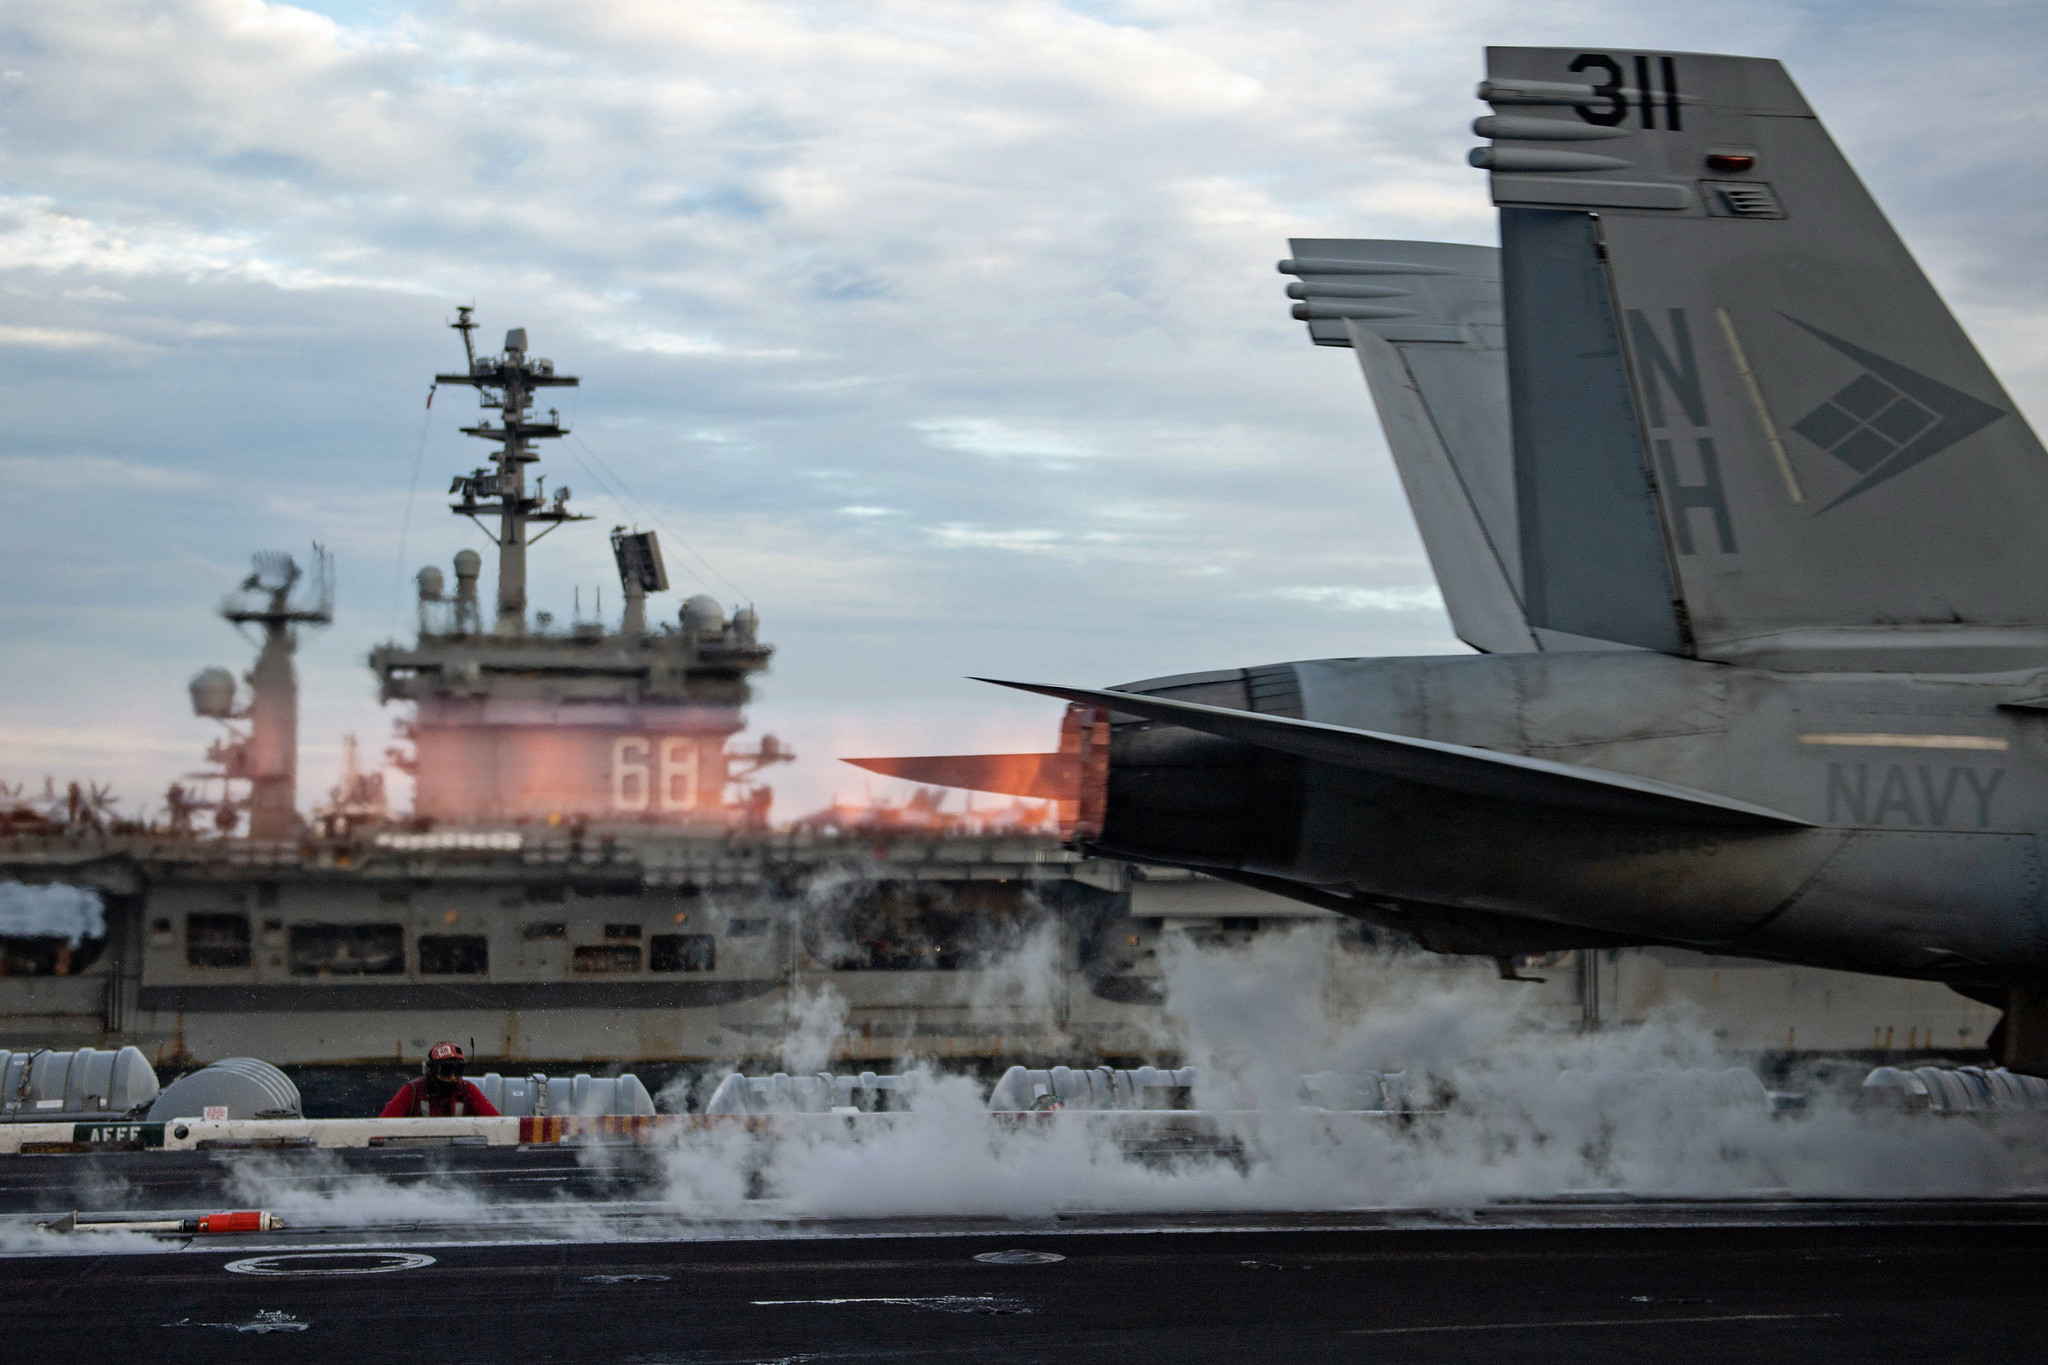 An F/A-18E Super Hornet launches from USS Theodore Roosevelt (CVN 71) while conducting dual-carrier operations with the Nimitz Carrier Strike Group in the South China Sea on 9 February 2021. © U.S. Indo-Pacific Command / Flickr 